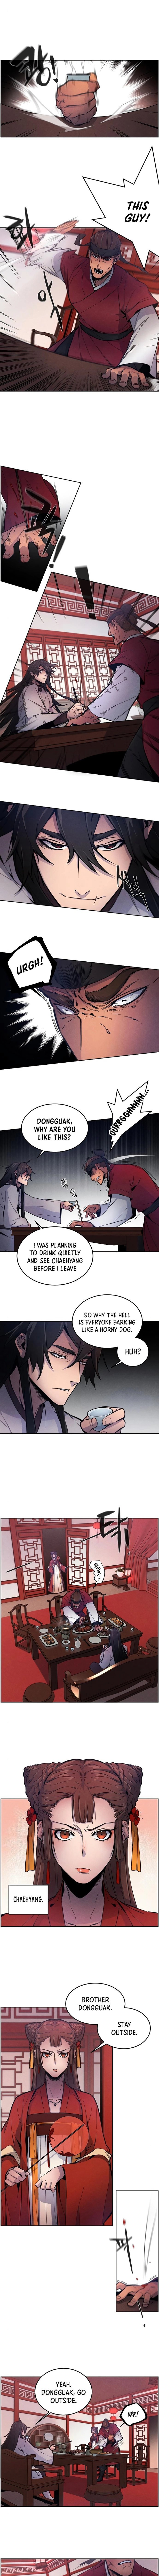 the-return-of-the-crazy-demon-chap-3-5